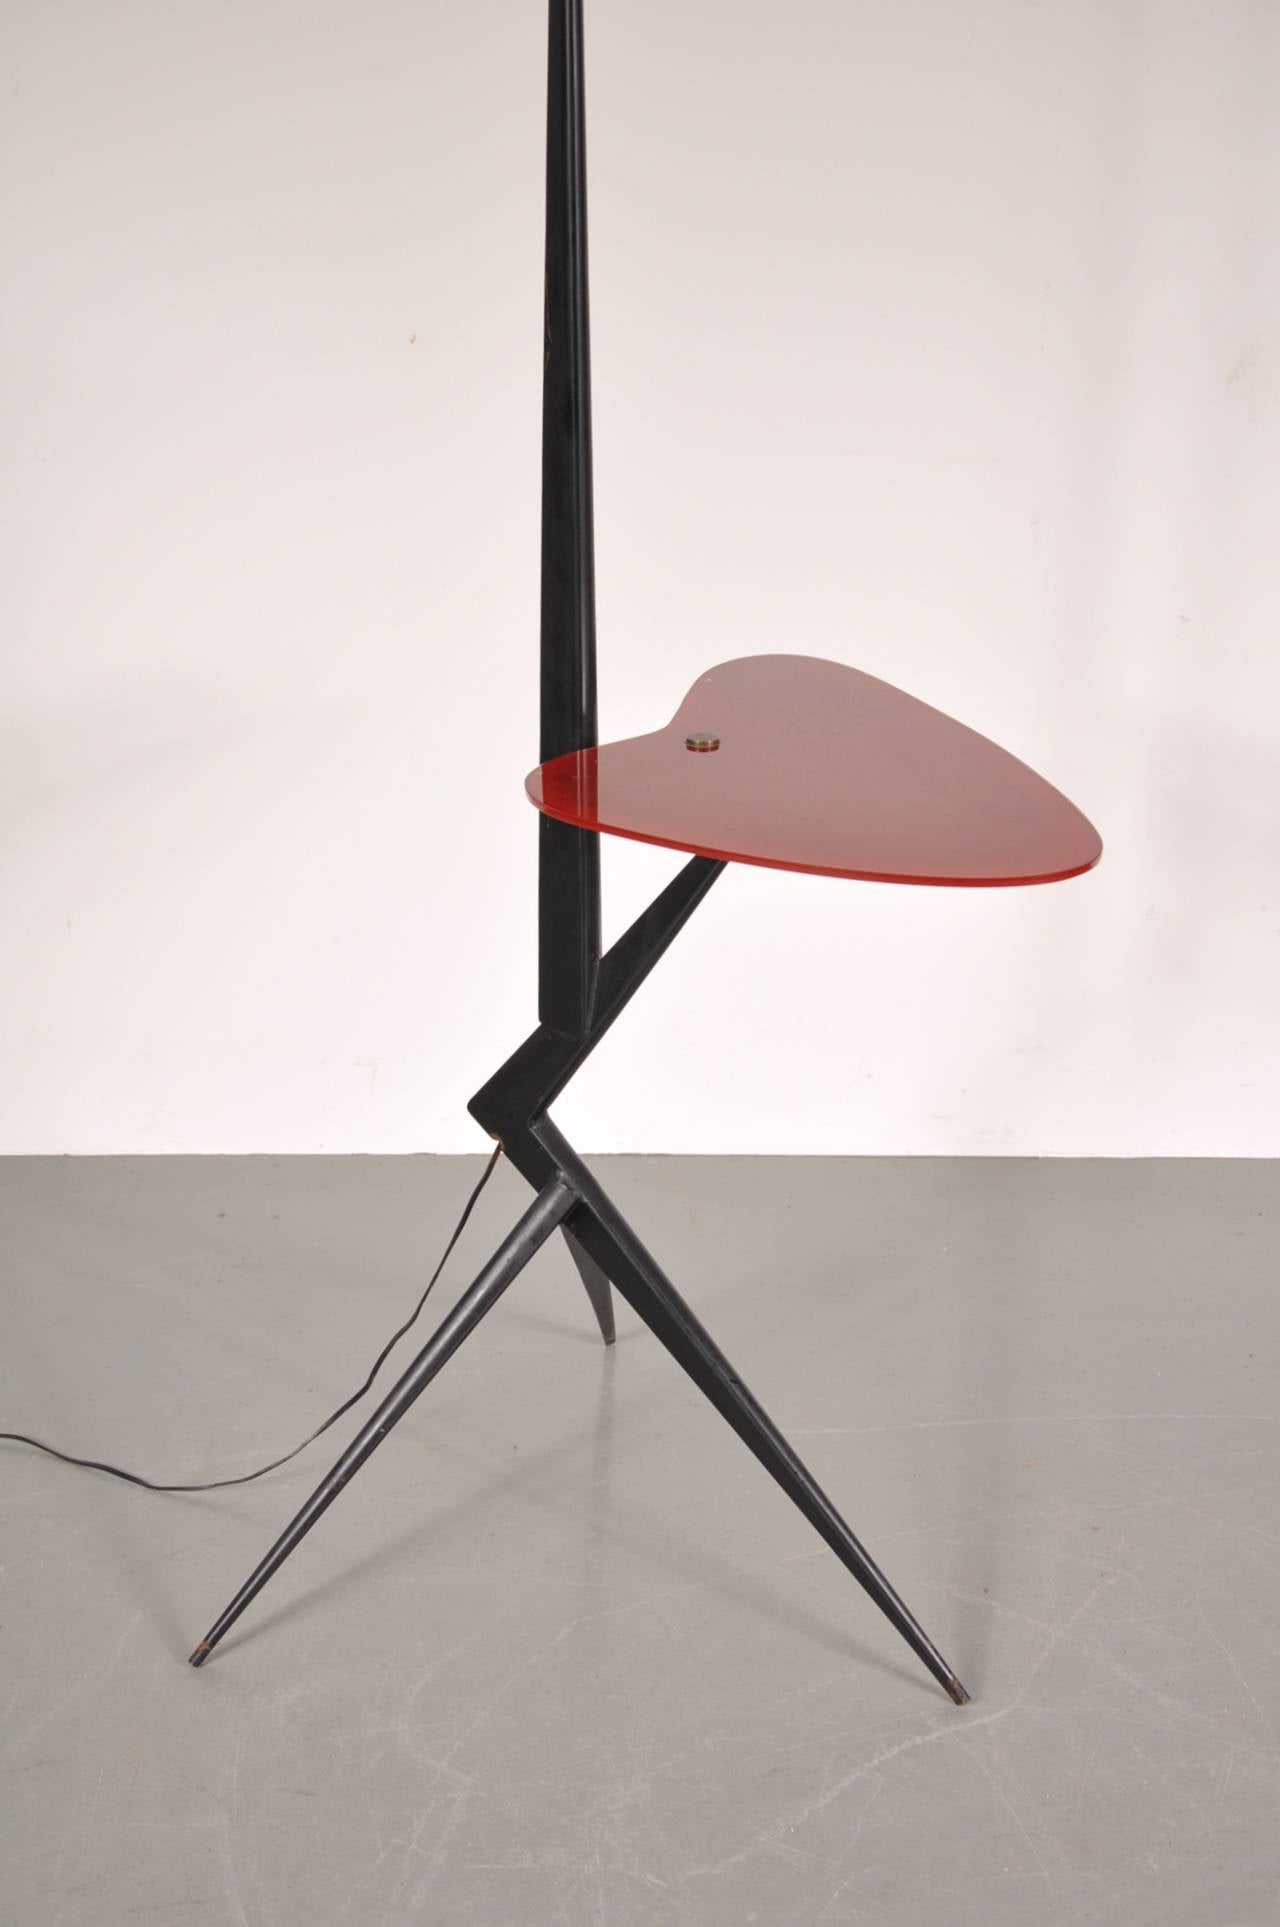 Very rare floor lamp attributed to Angelo Ostuni, manufactured around 1950.

The lamp has a black metal base with three legs and a unique folded part leading to a small red glass side table top. It has a white fabric hood. All together this lamp